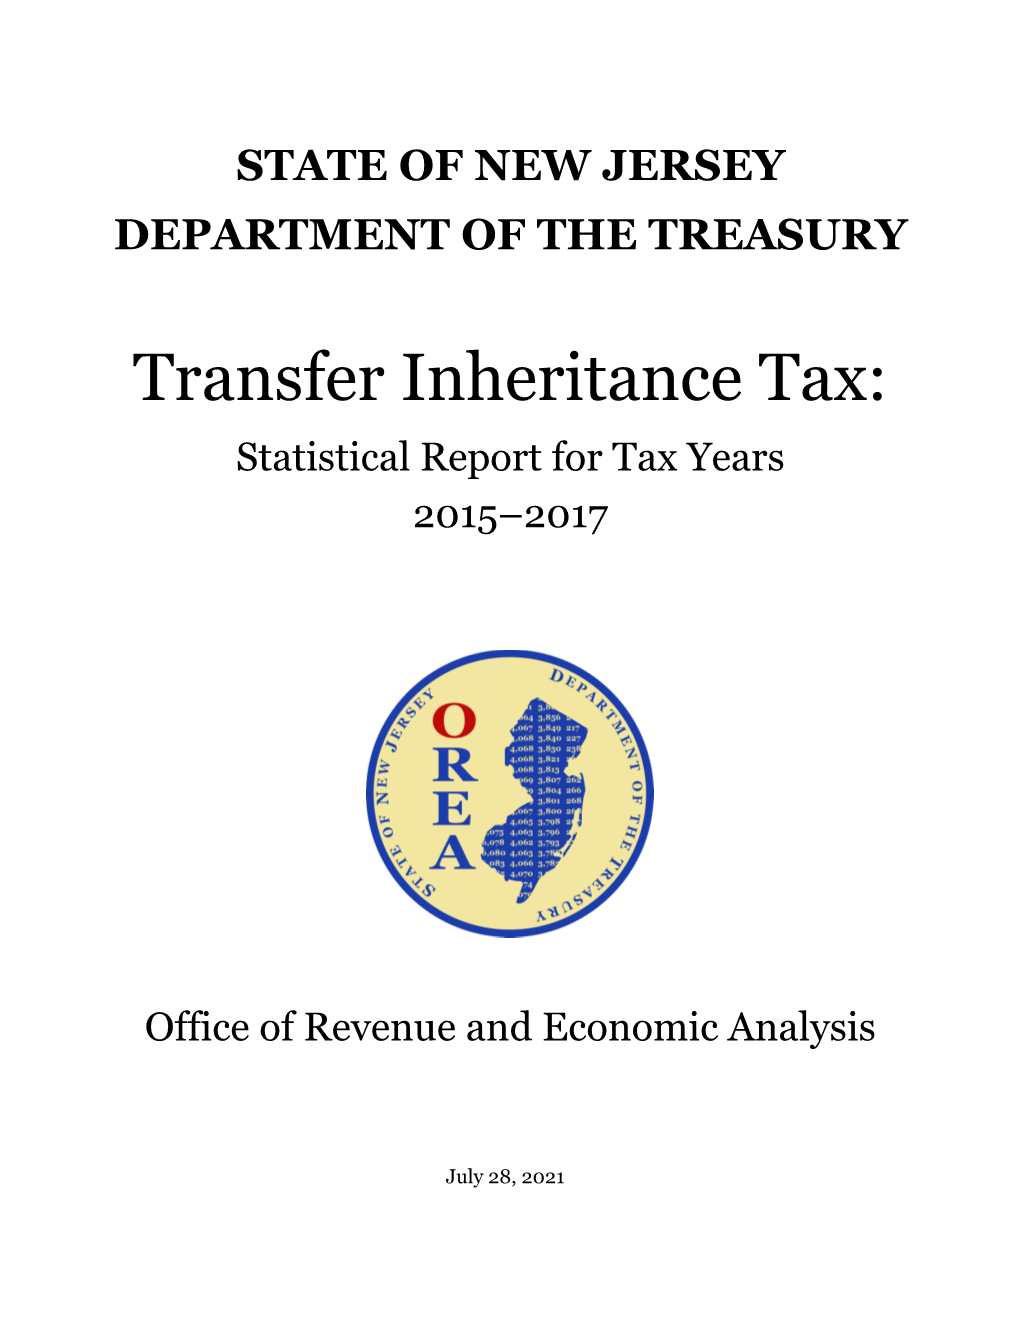 Transfer Inheritance Tax: Statistical Report for Tax Years 2015–2017